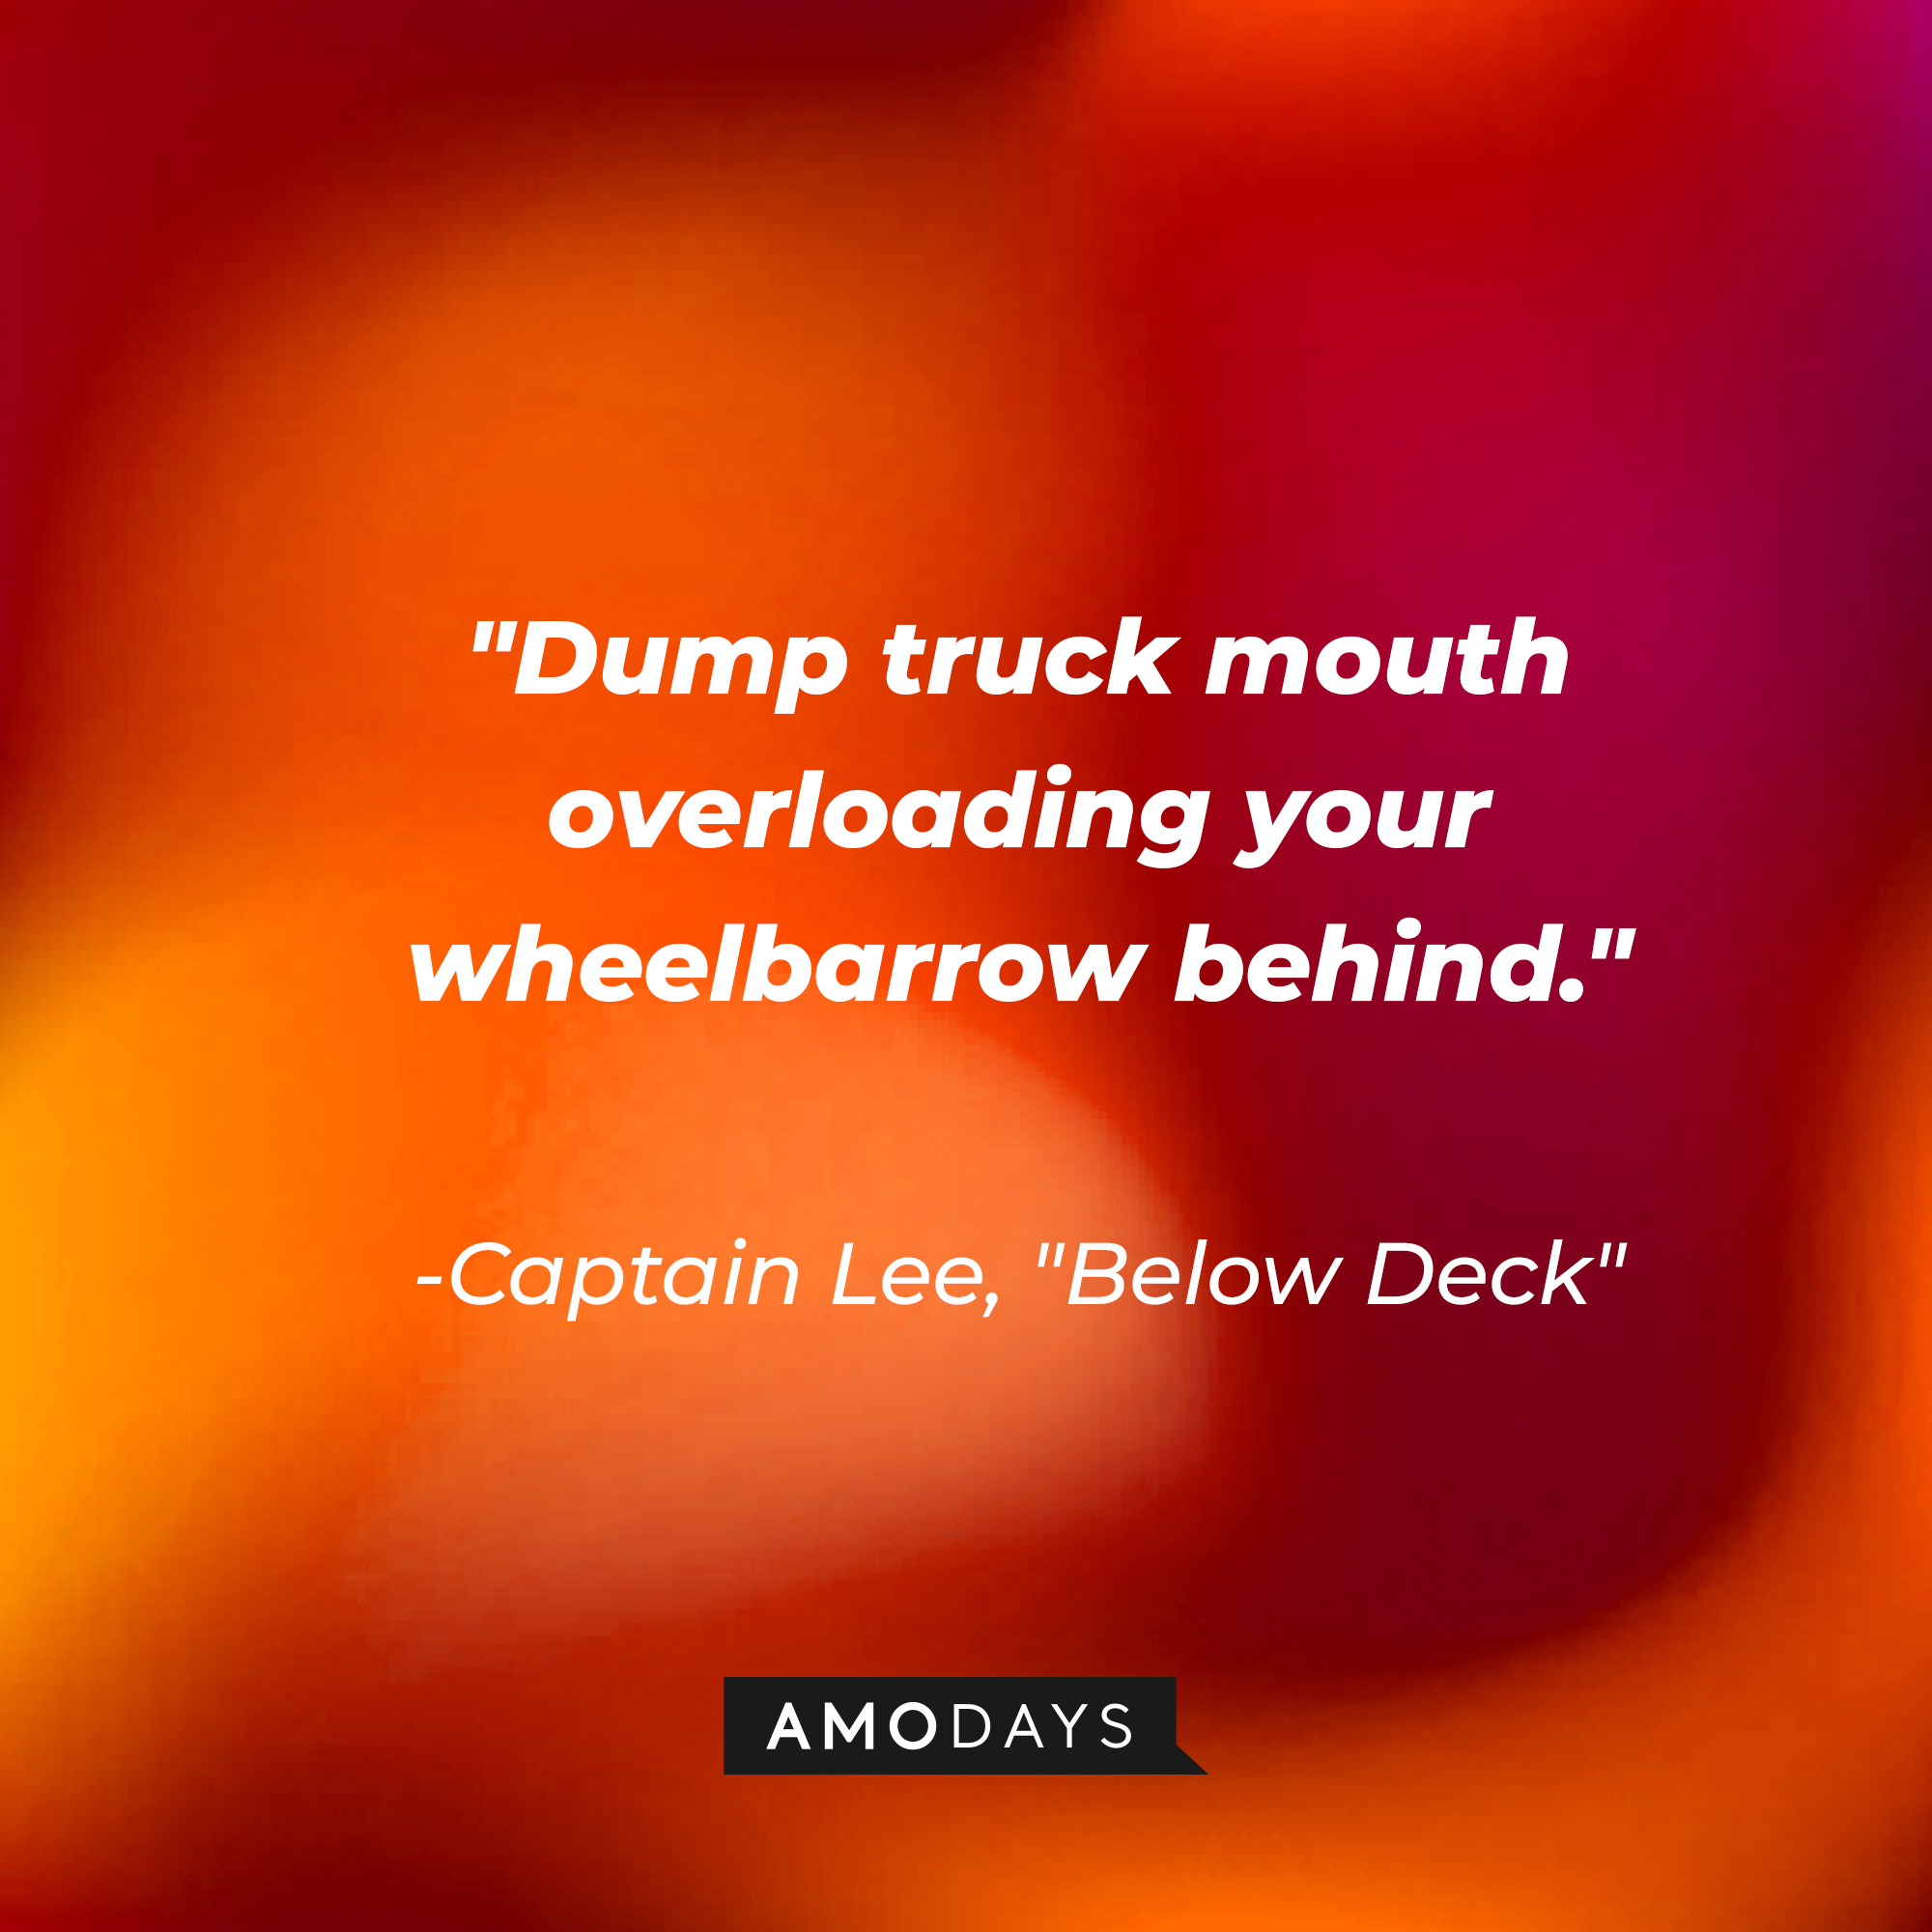 Captain Lee's quote from "Below Deck:" "Dump truck mouth overloading your wheelbarrow behind." | Source: AmoDays